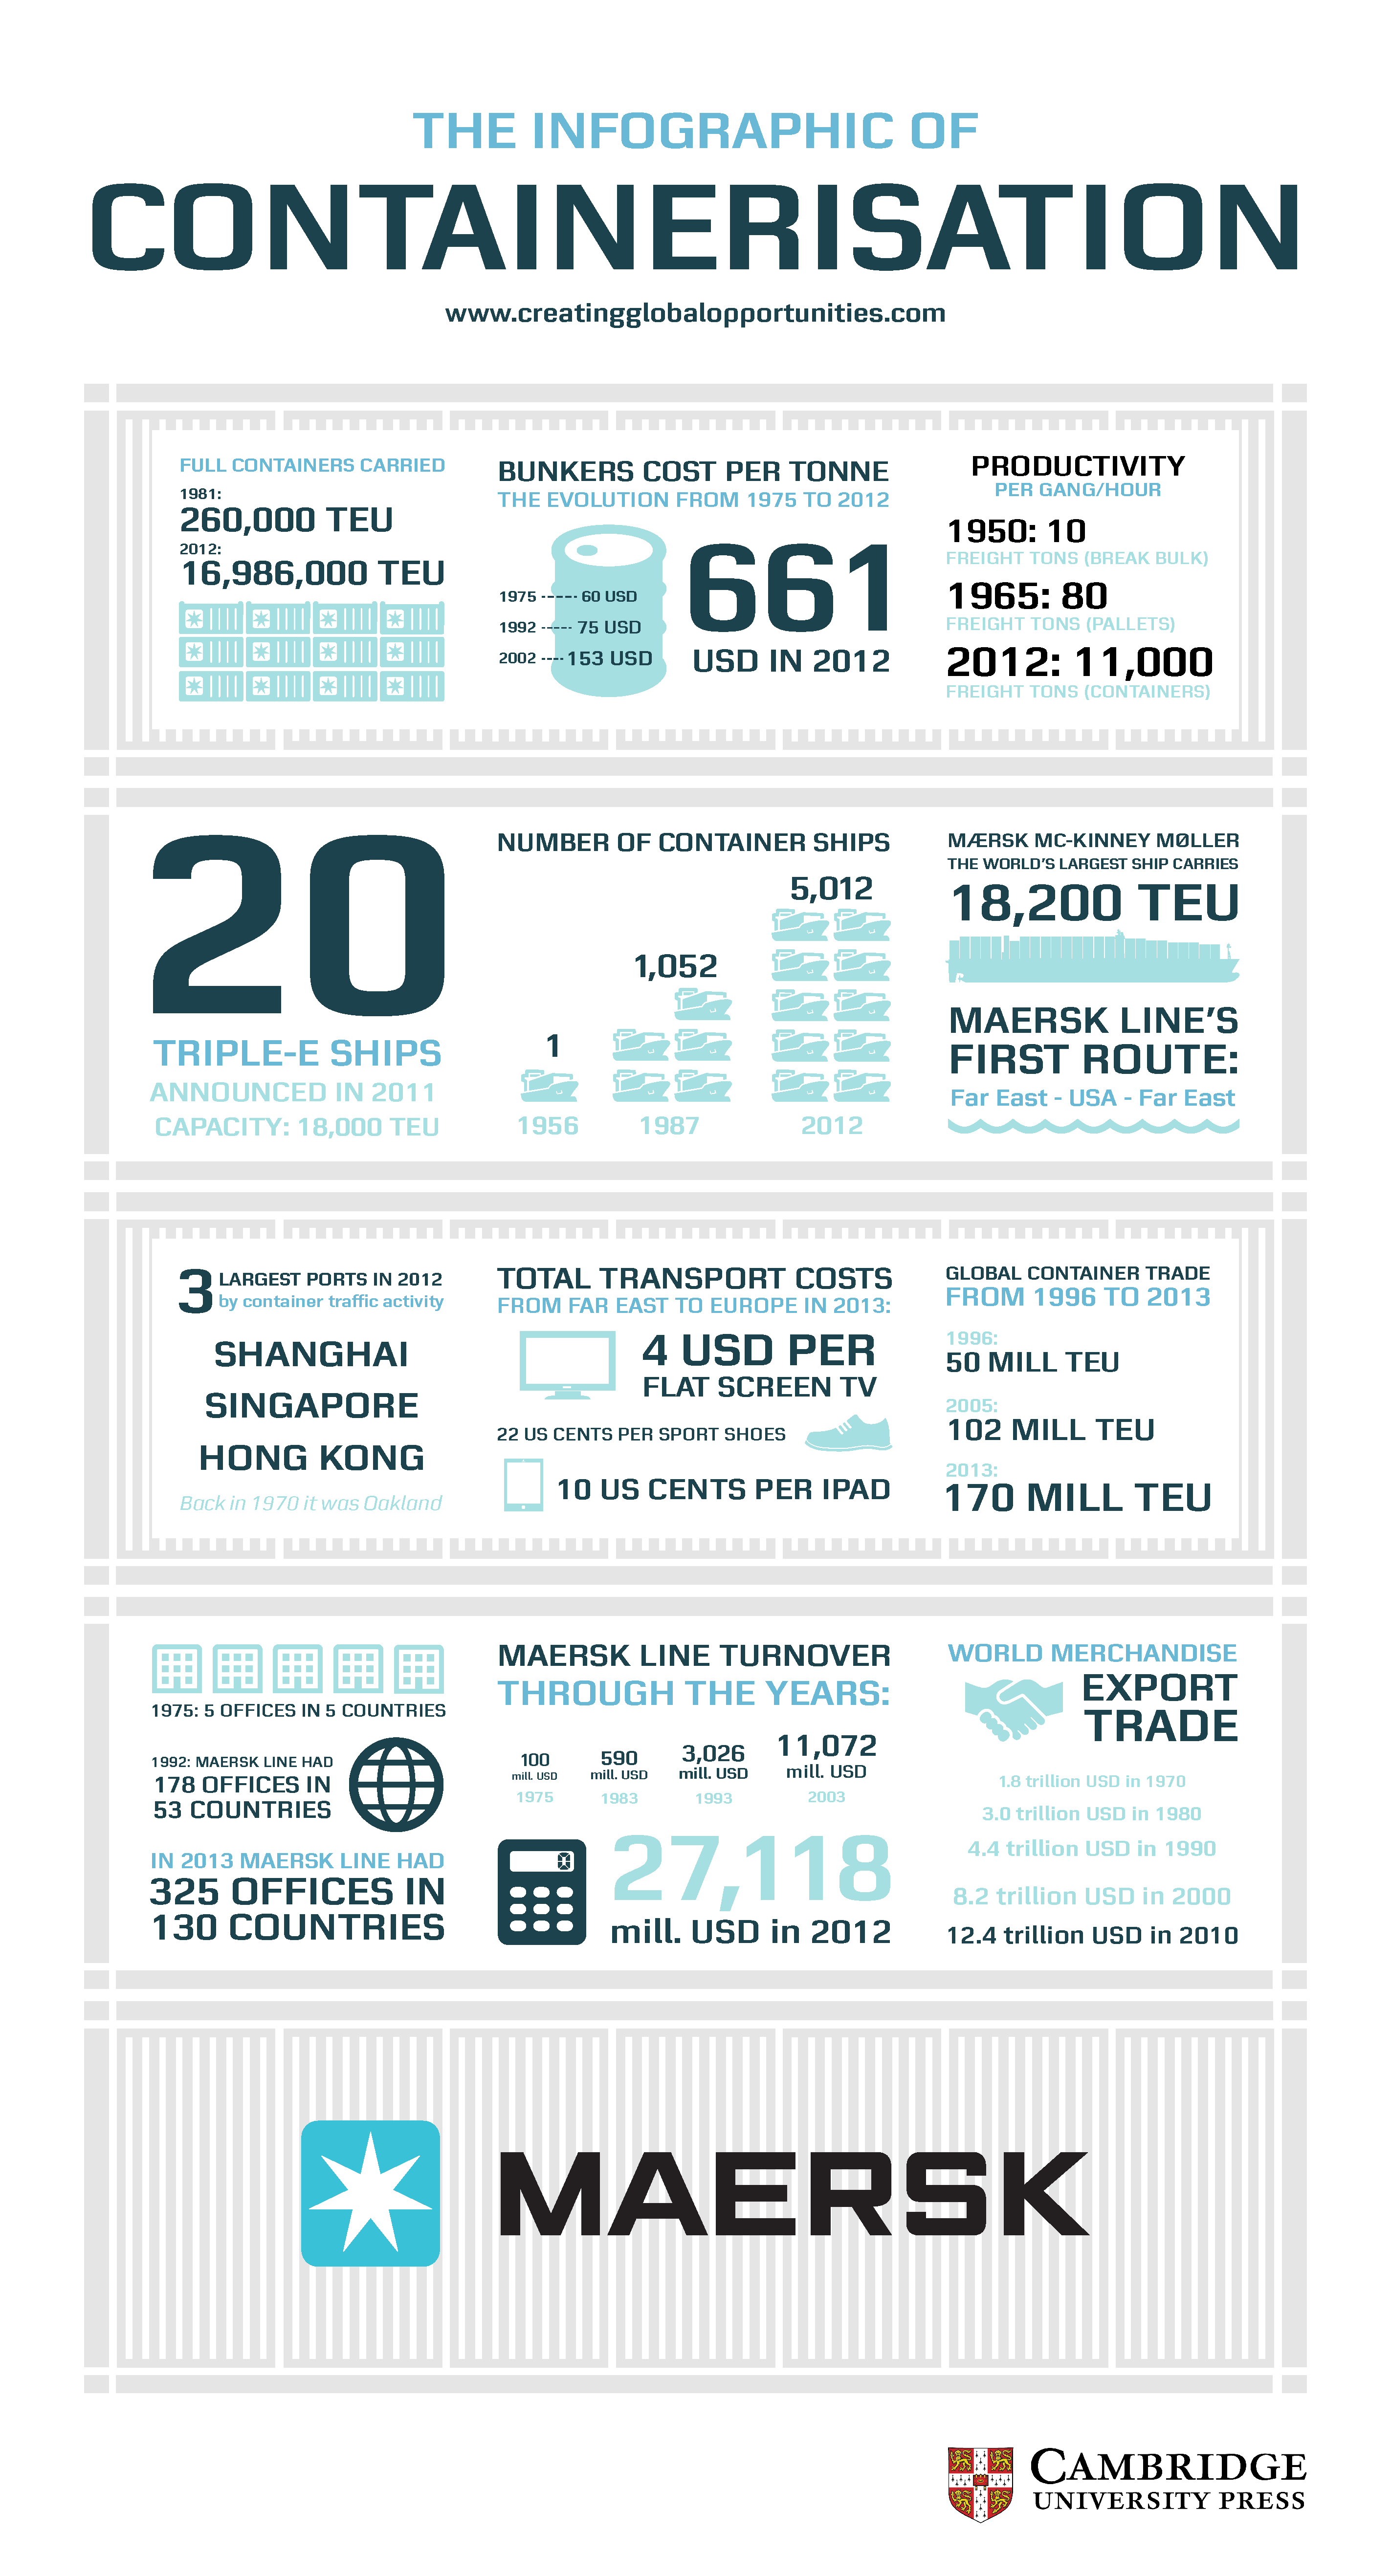 Maersk infographic- final version